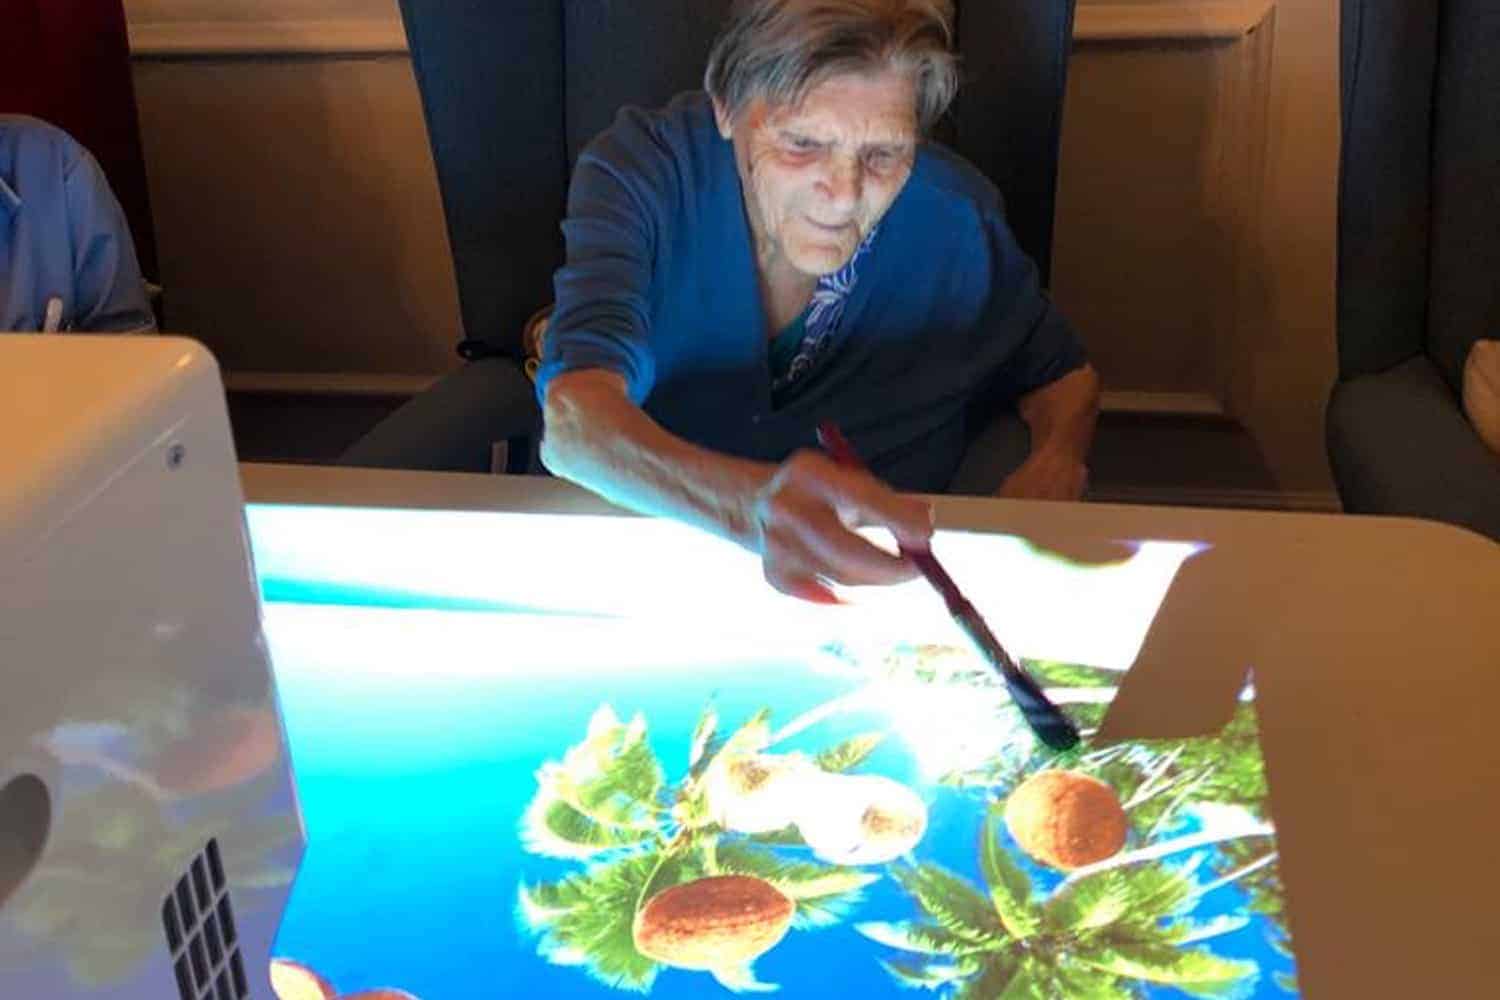 Elderly person engaging with technology, interacting with an Omi Interactive Board display featuring tropical imagery.